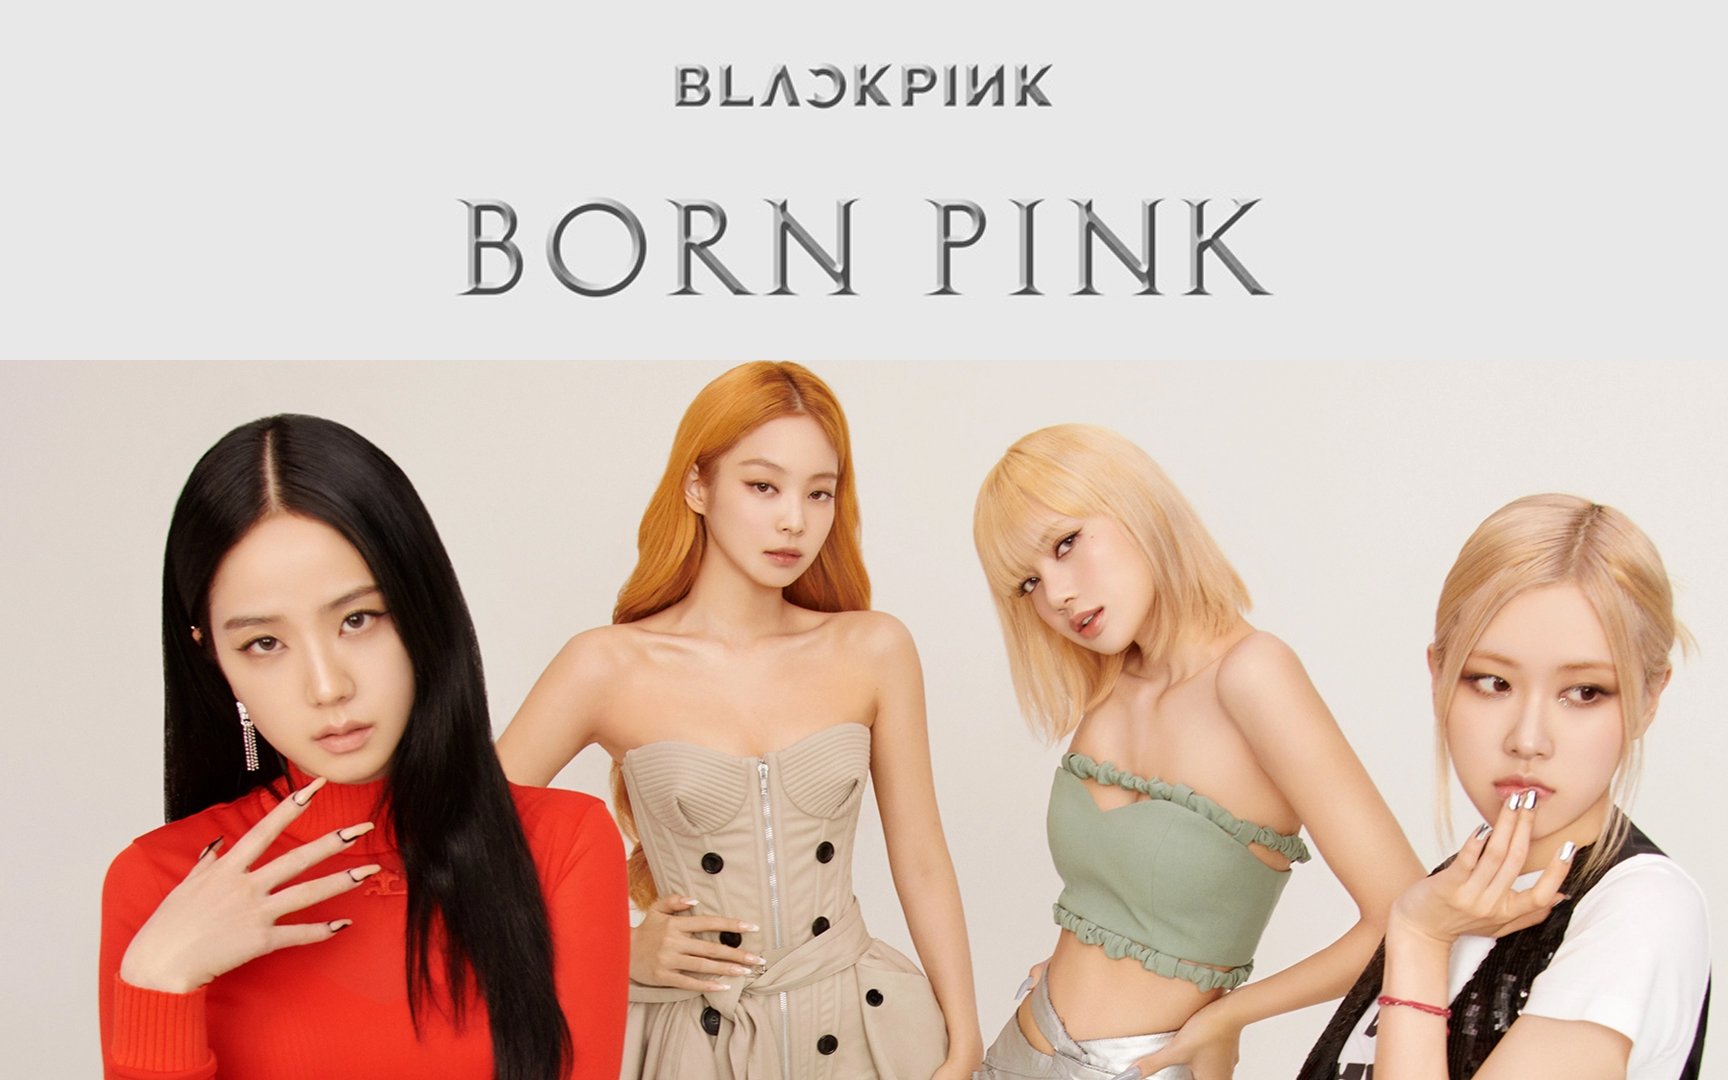 BLACKPINK drops a teaser poster for their 2nd album 'BORN PINK